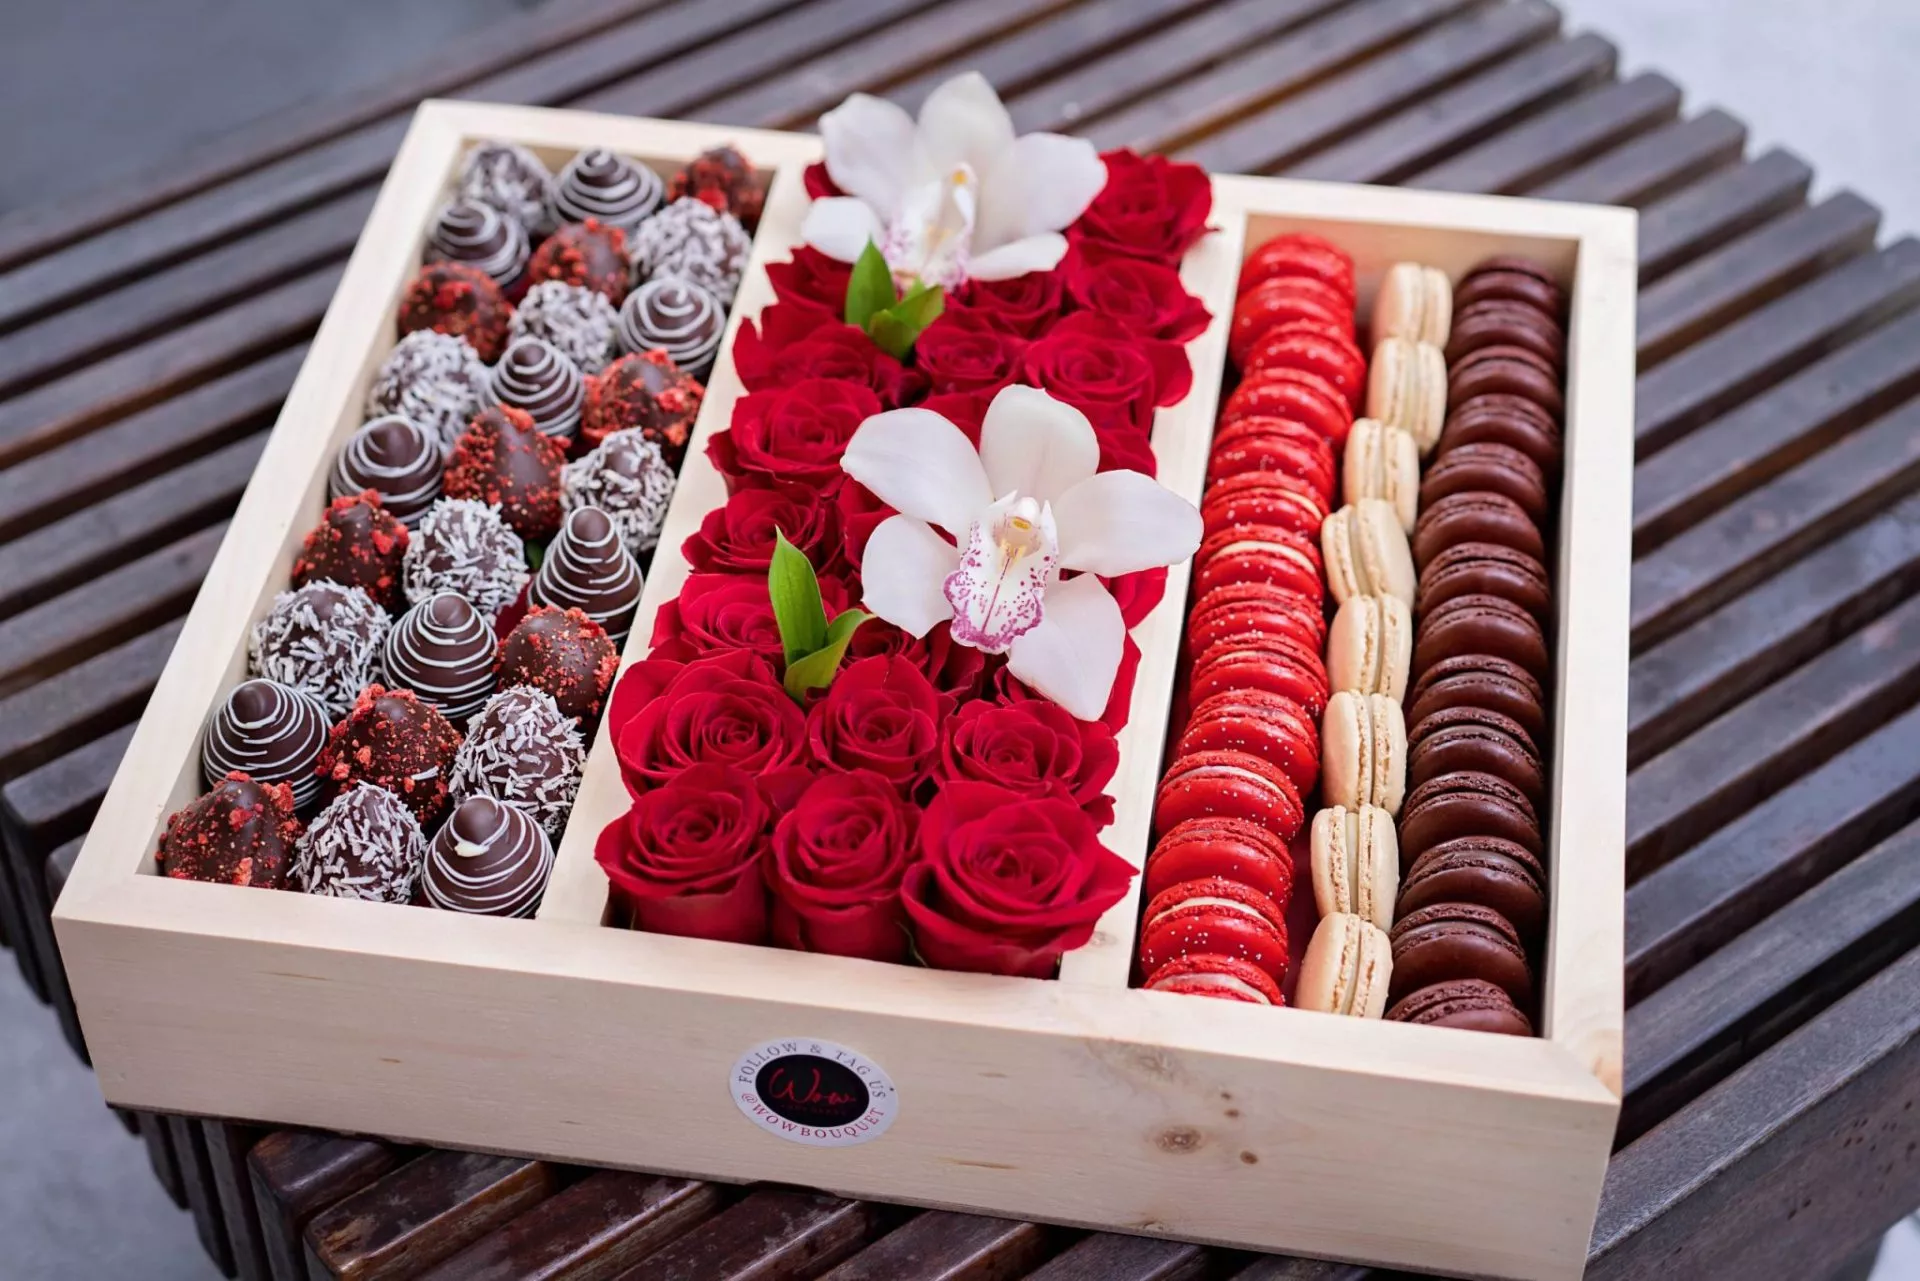 Mouthwatering chocolate-covered strawberries and macarons.